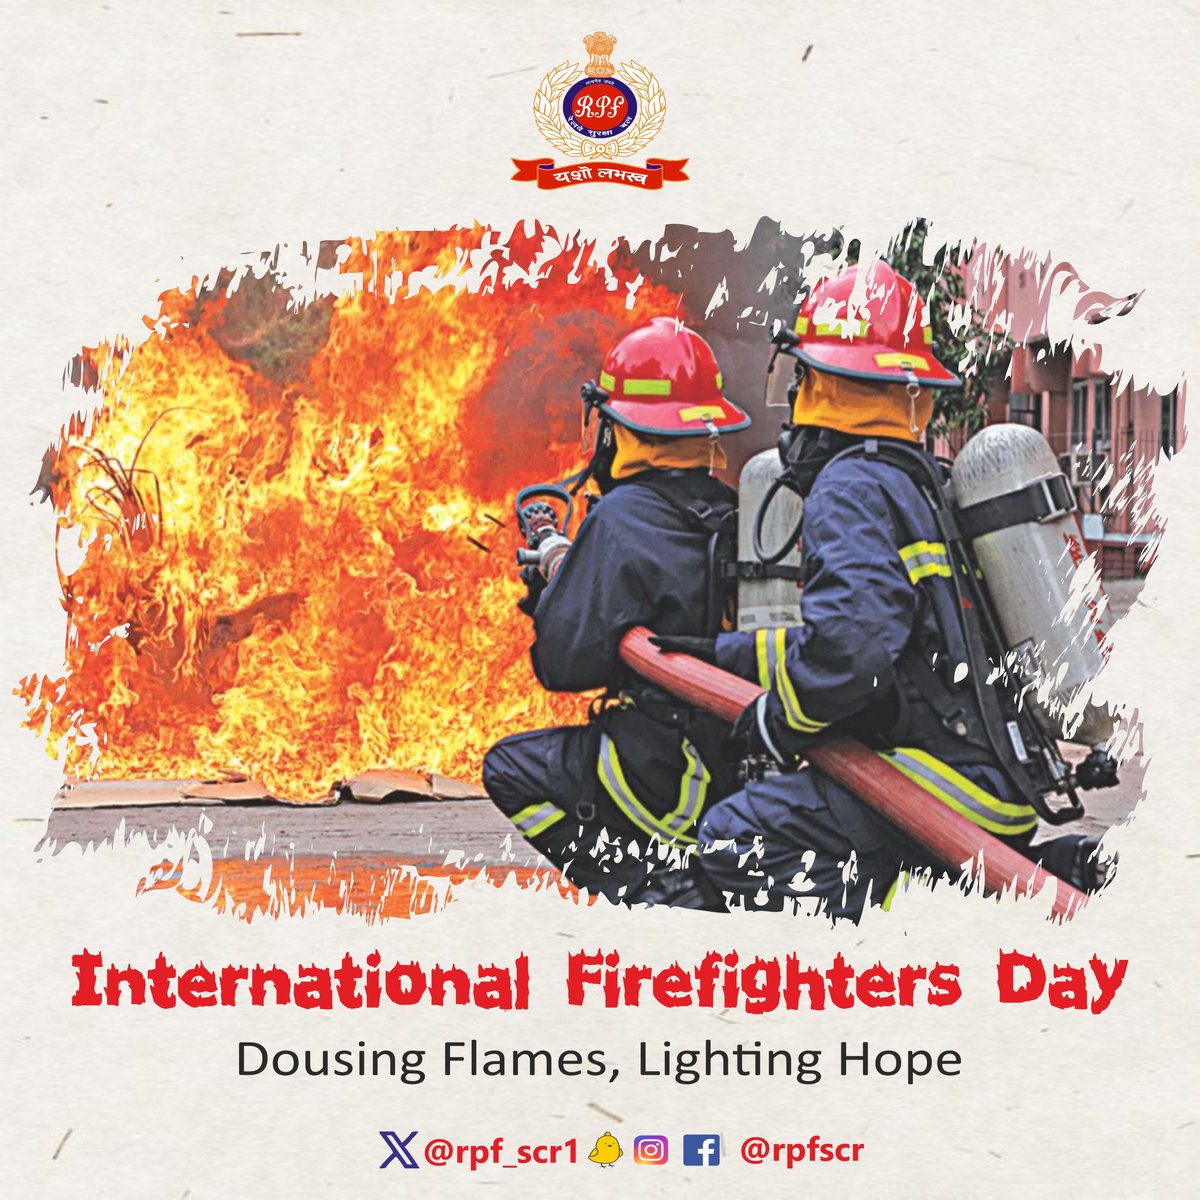 We the #RPF express our heartfelt appreciation to the courageous firefighters who embody bravery, resilience, and compassion. Your contributions to public safety are invaluable. Happy #InternationalFirefightersDay #firefighter #firesafety @RPF_INDIA @RailMinIndia @SCRailwayIndia